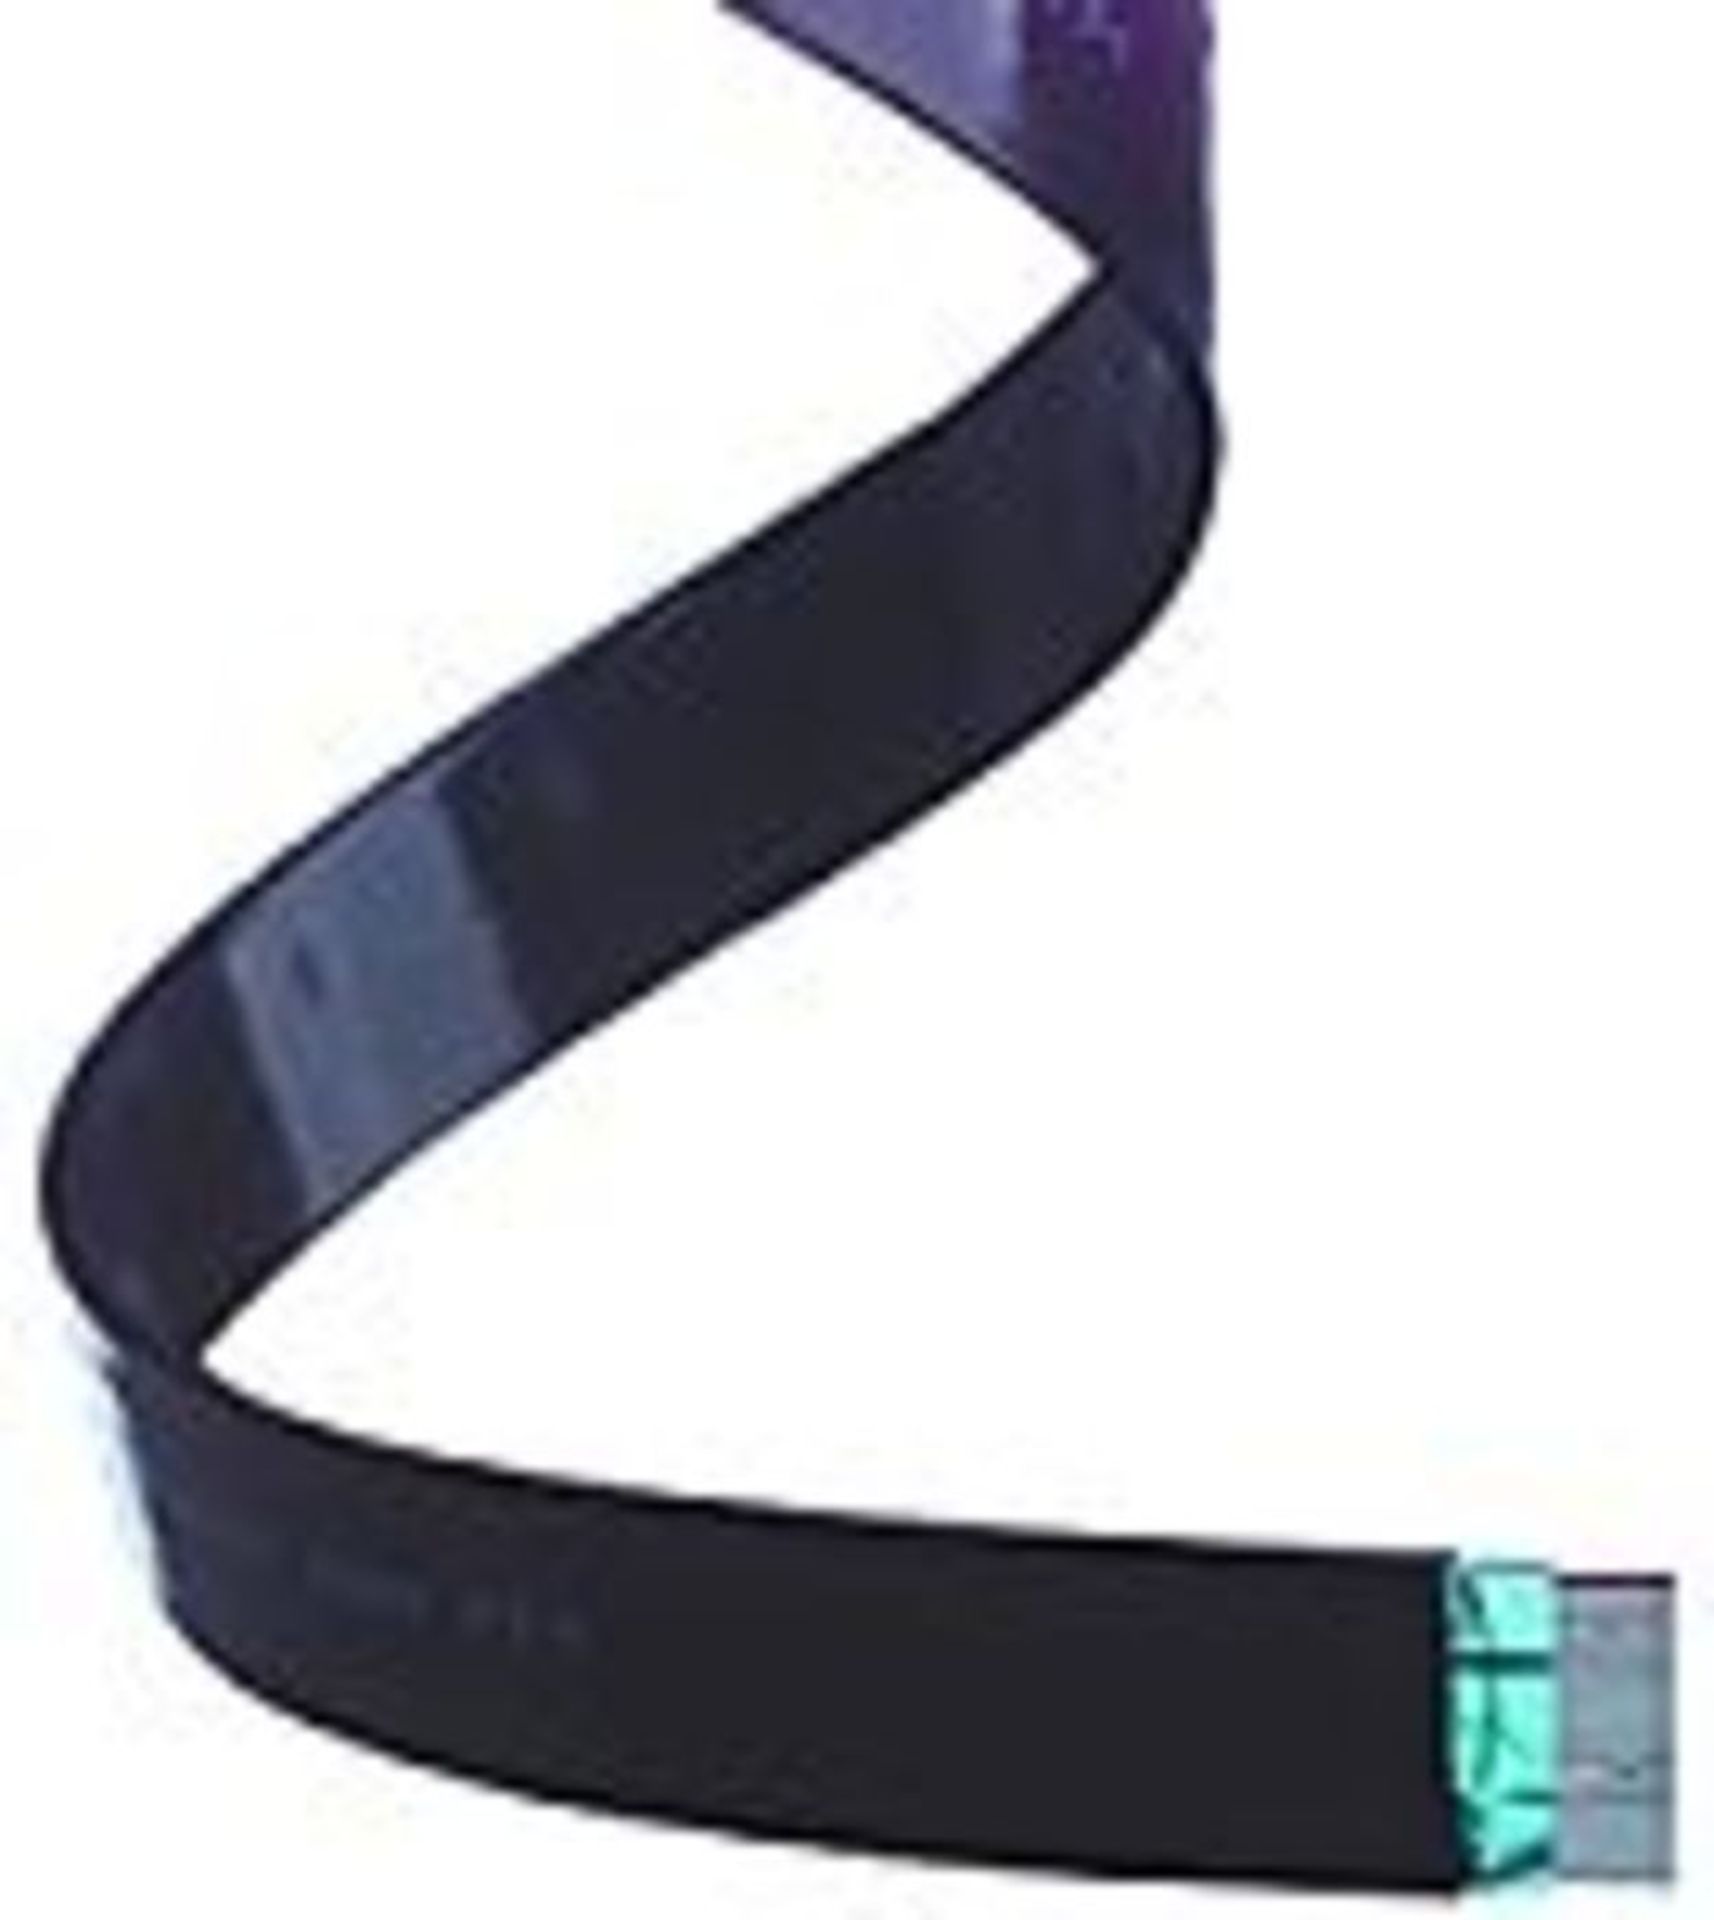 Amphenol 37 Way Screened Flat Ribbon Cable, 1.91 in Width, Series Spectra-Strip - Image 2 of 2